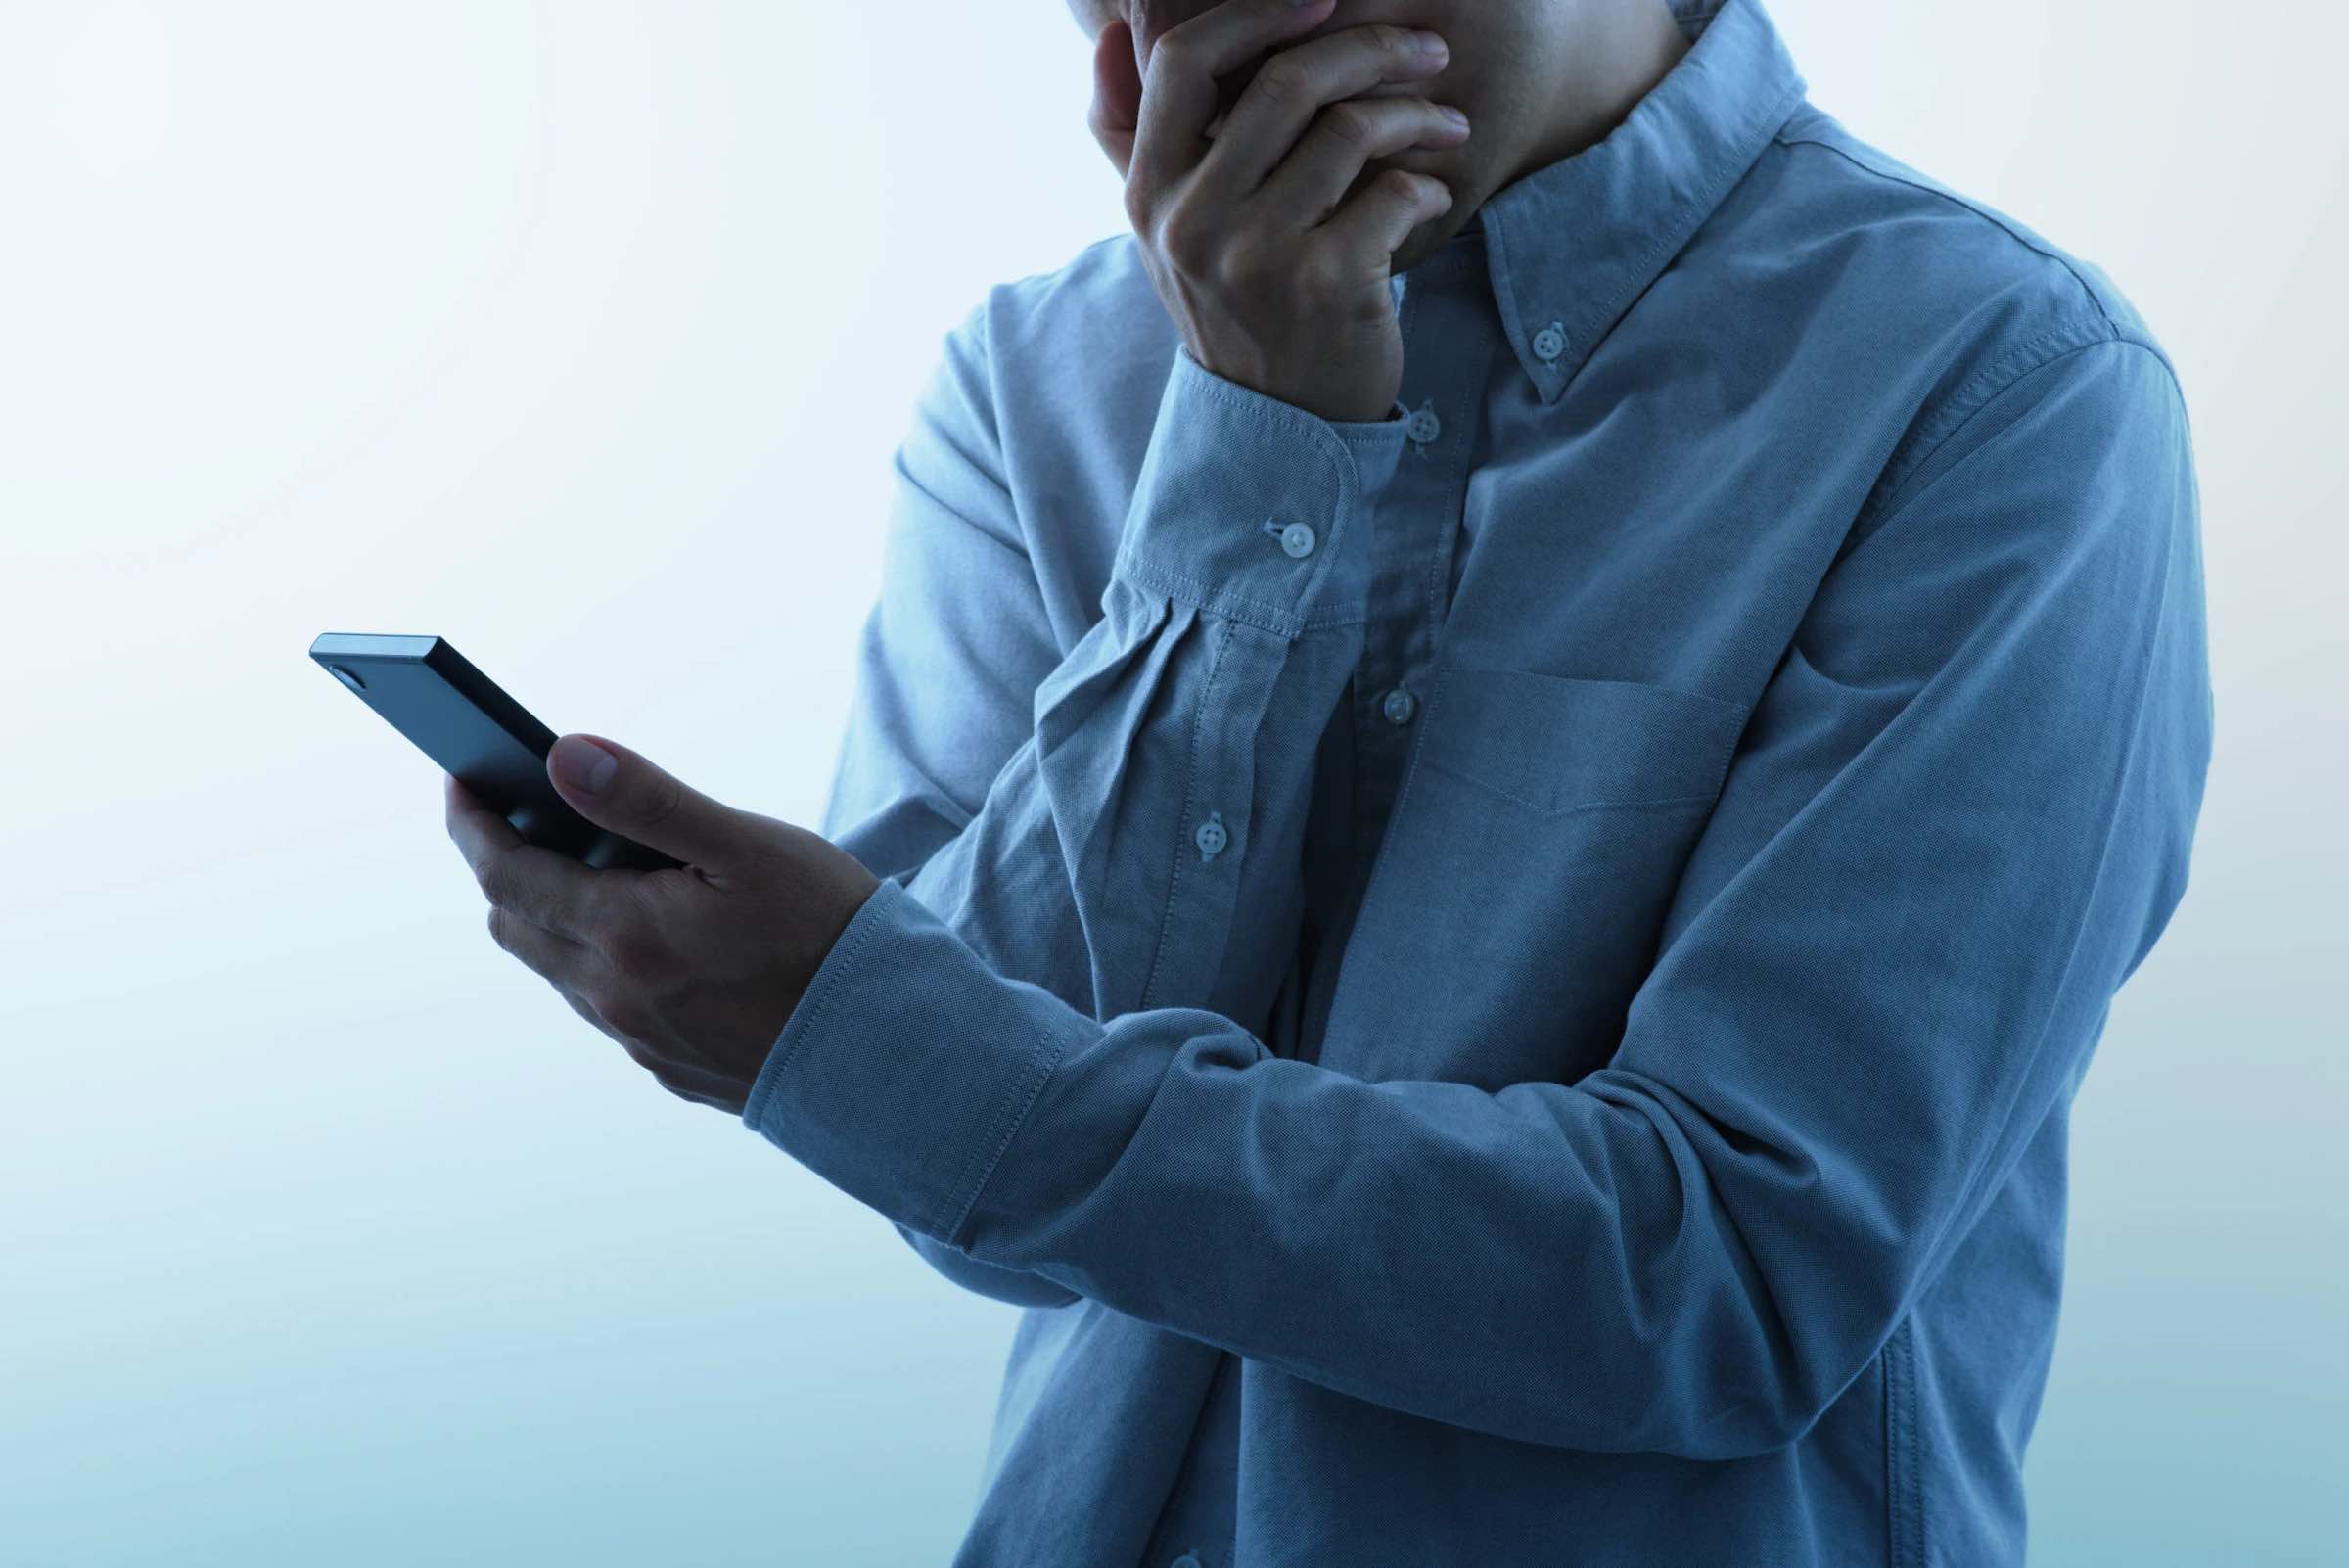 Prevent phone scams and fraud with numbering services